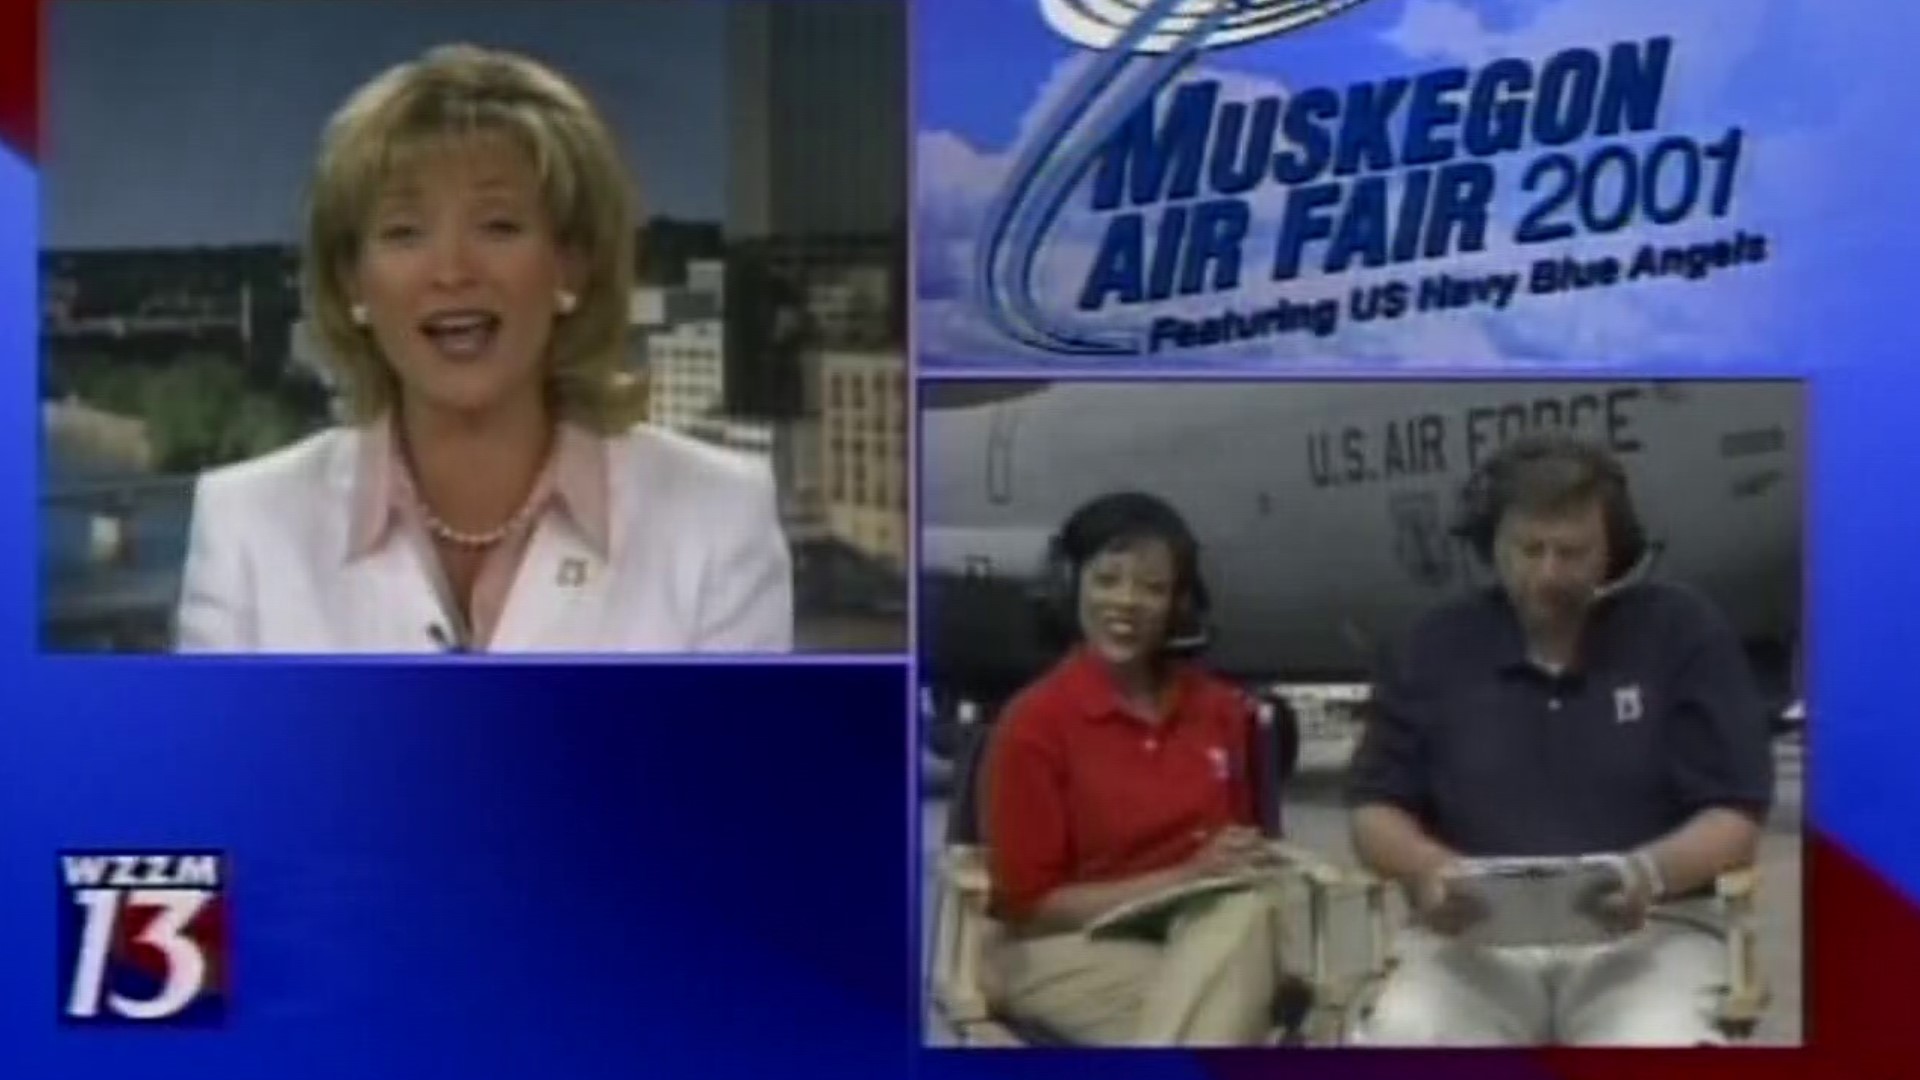 Straight out of the 13 Vault archives, we're giving new life to WZZM's live coverage of the 2001 Muskegon Air Fair.